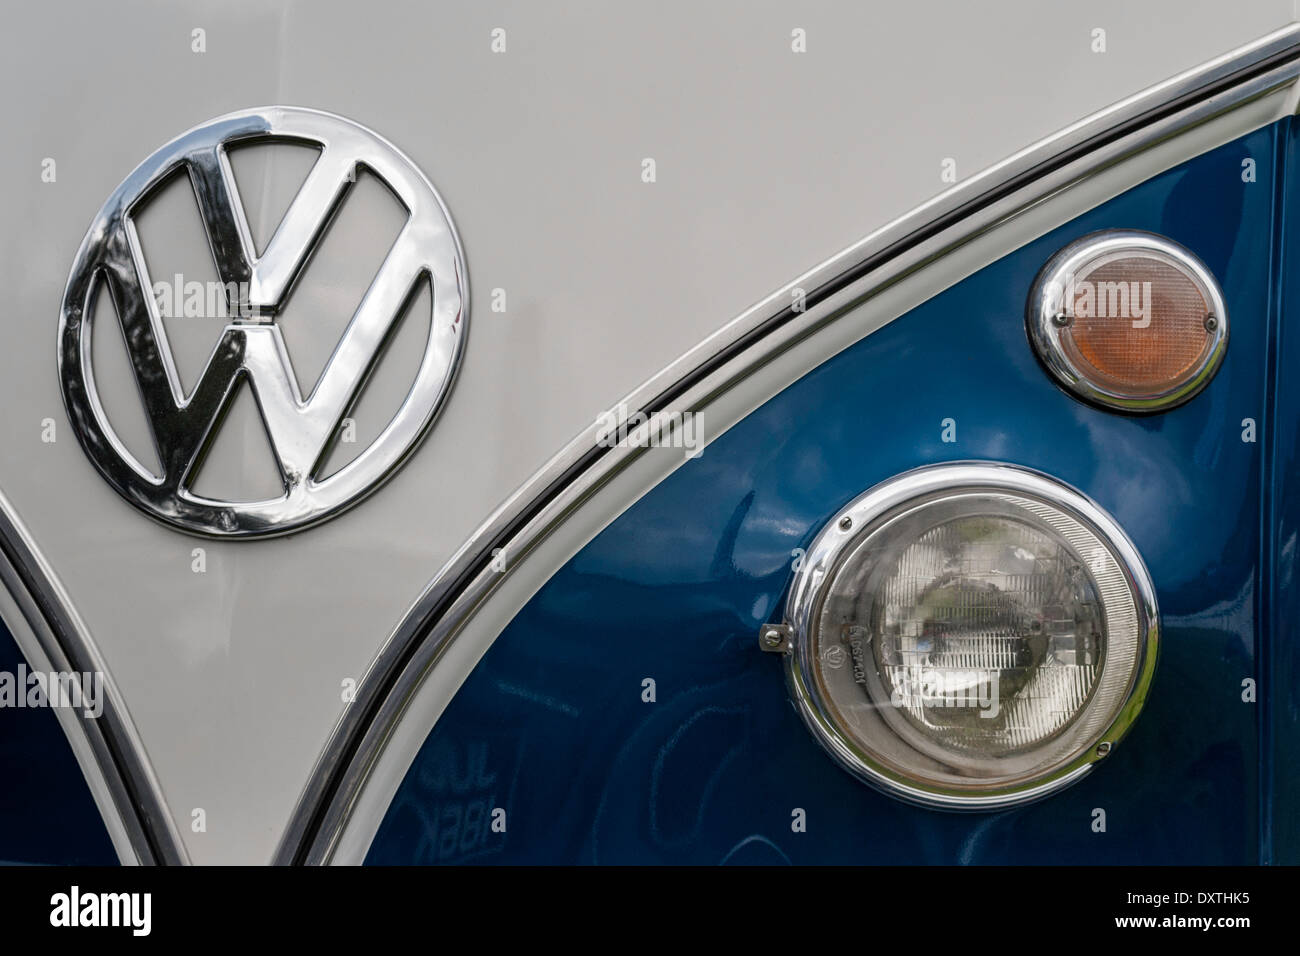 Volkswagen Vans. Blue White and chrome front view. Stock Photo